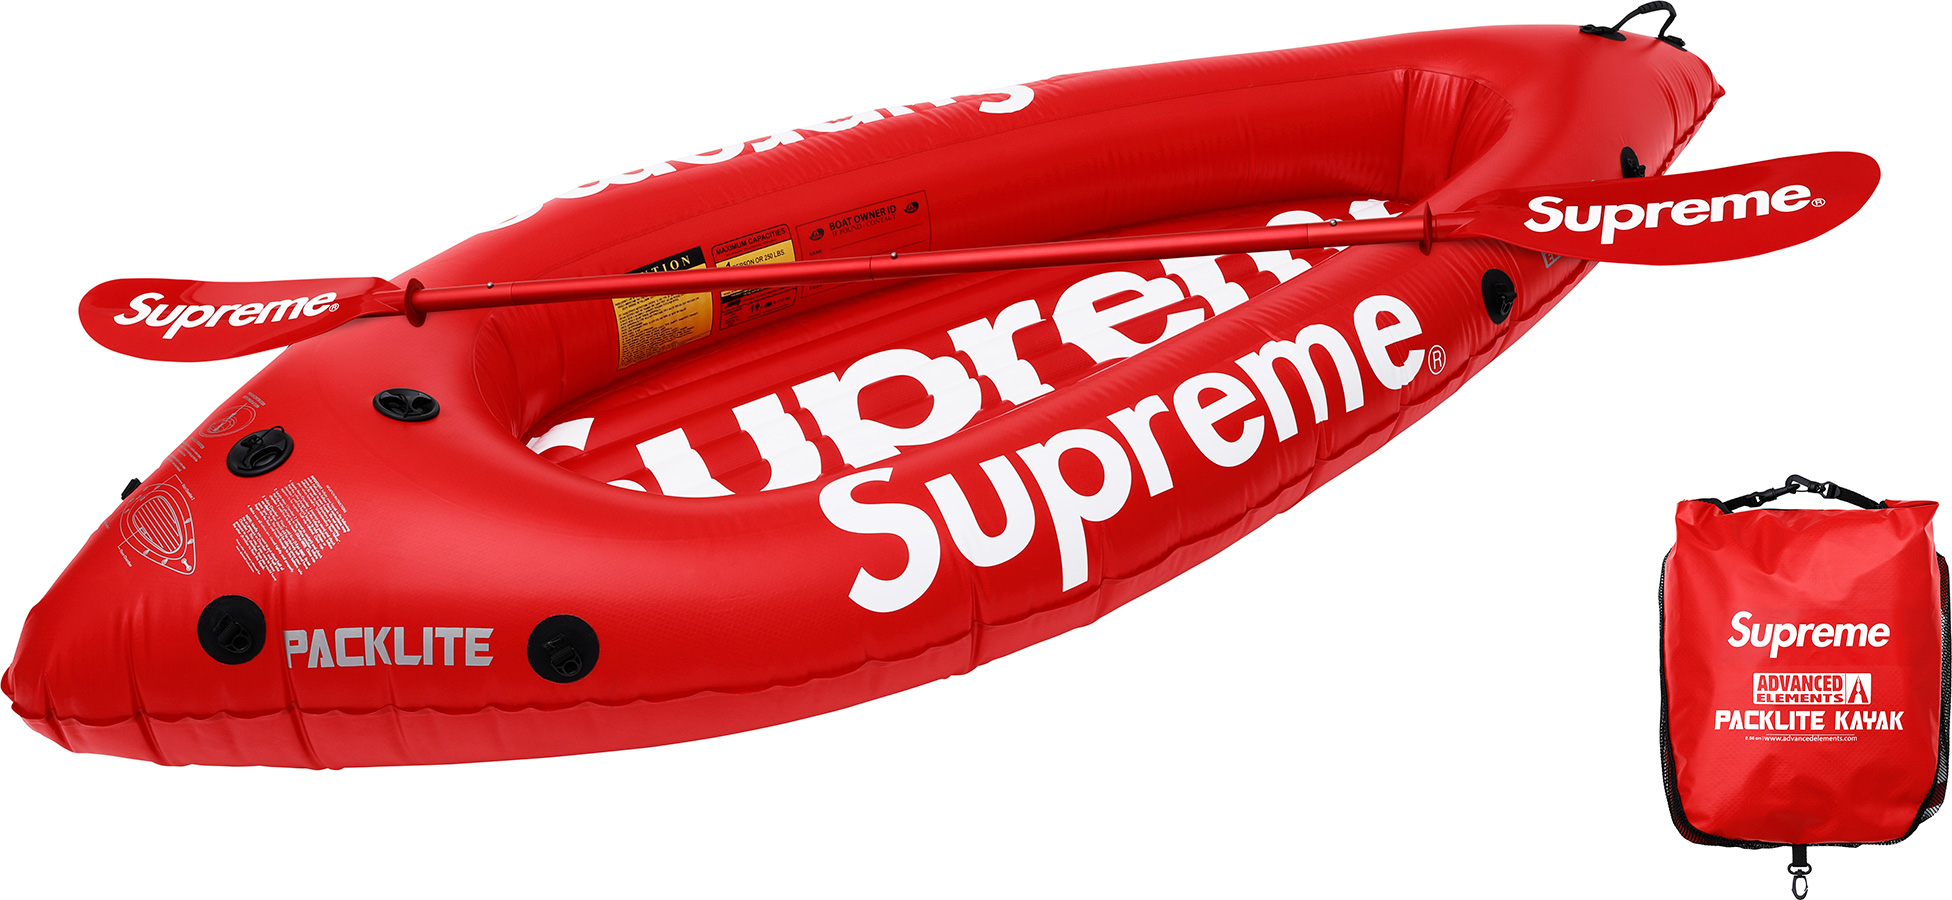 The Weirdest Supreme Collabs and Items Ever Made